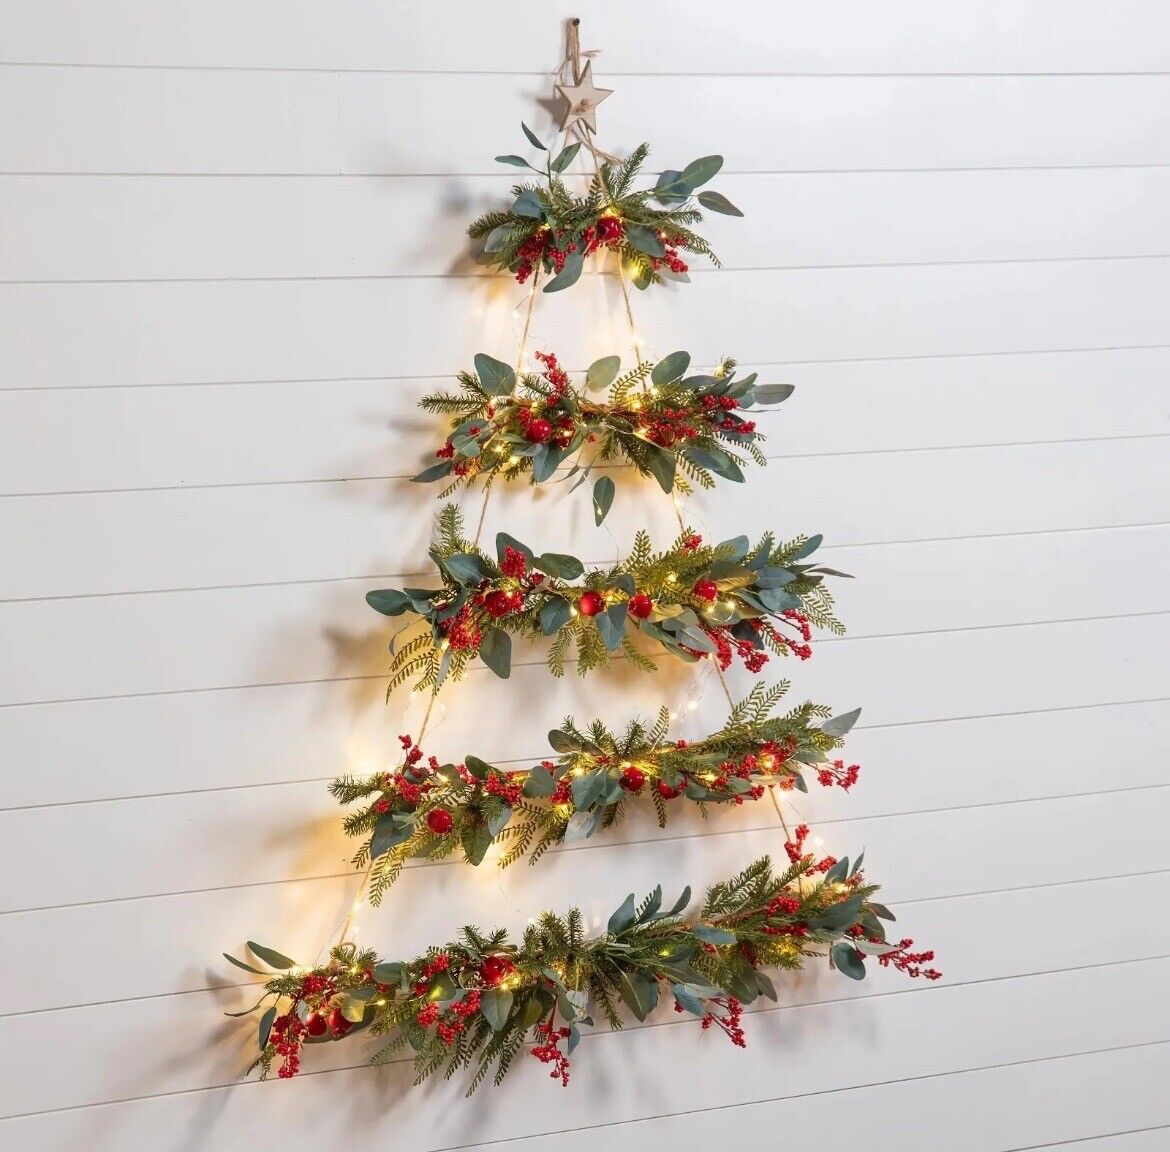 Lighted Hanging Wall Christmas Tree on a plain wall, showcasing its greenery, berries, and warm LED lights.